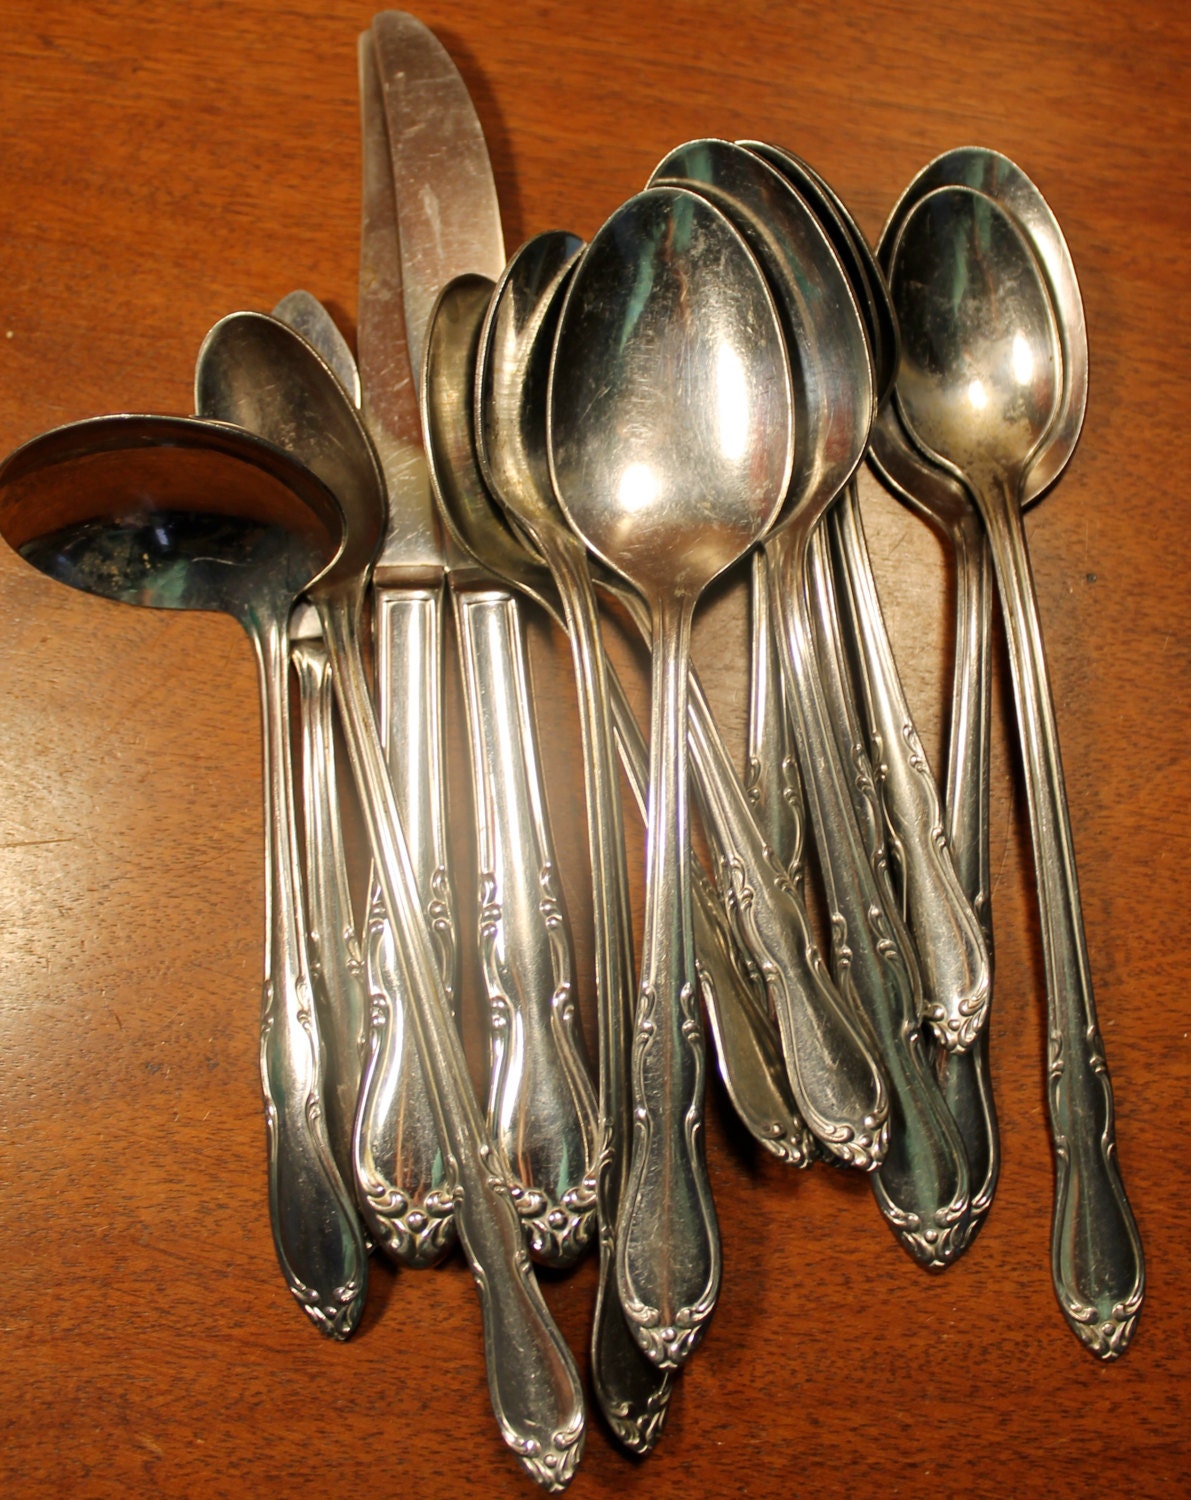 Stainless Flatware marked Minuet or Simeon George by AtomicHoliday